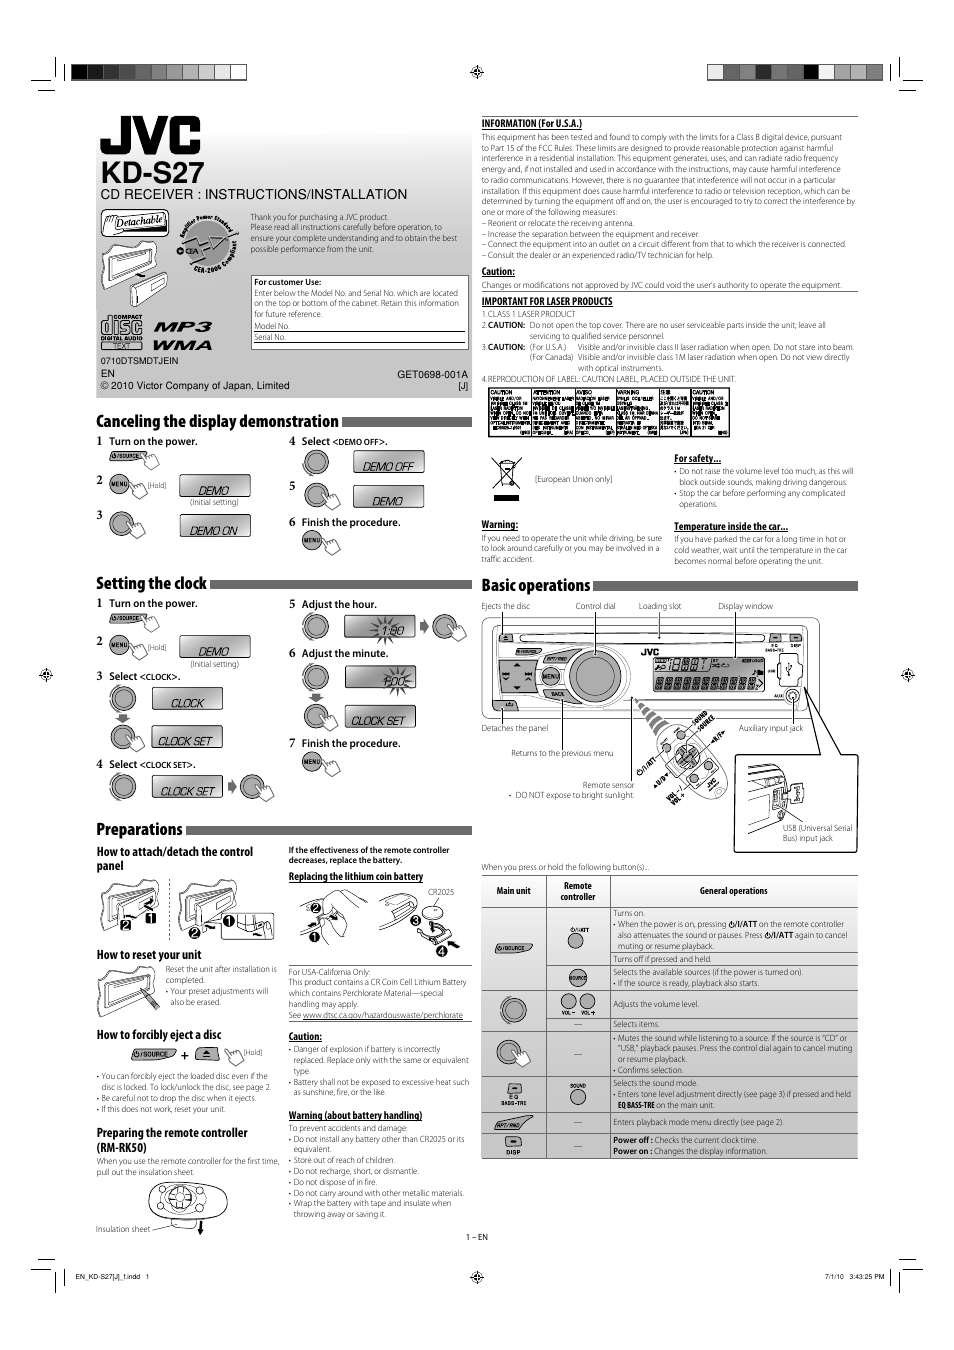 Kd-s27, Instructions/installation, Information (for u.s.a.) | JVC KD-R311  User Manual | Page 37 / 42 | Original mode